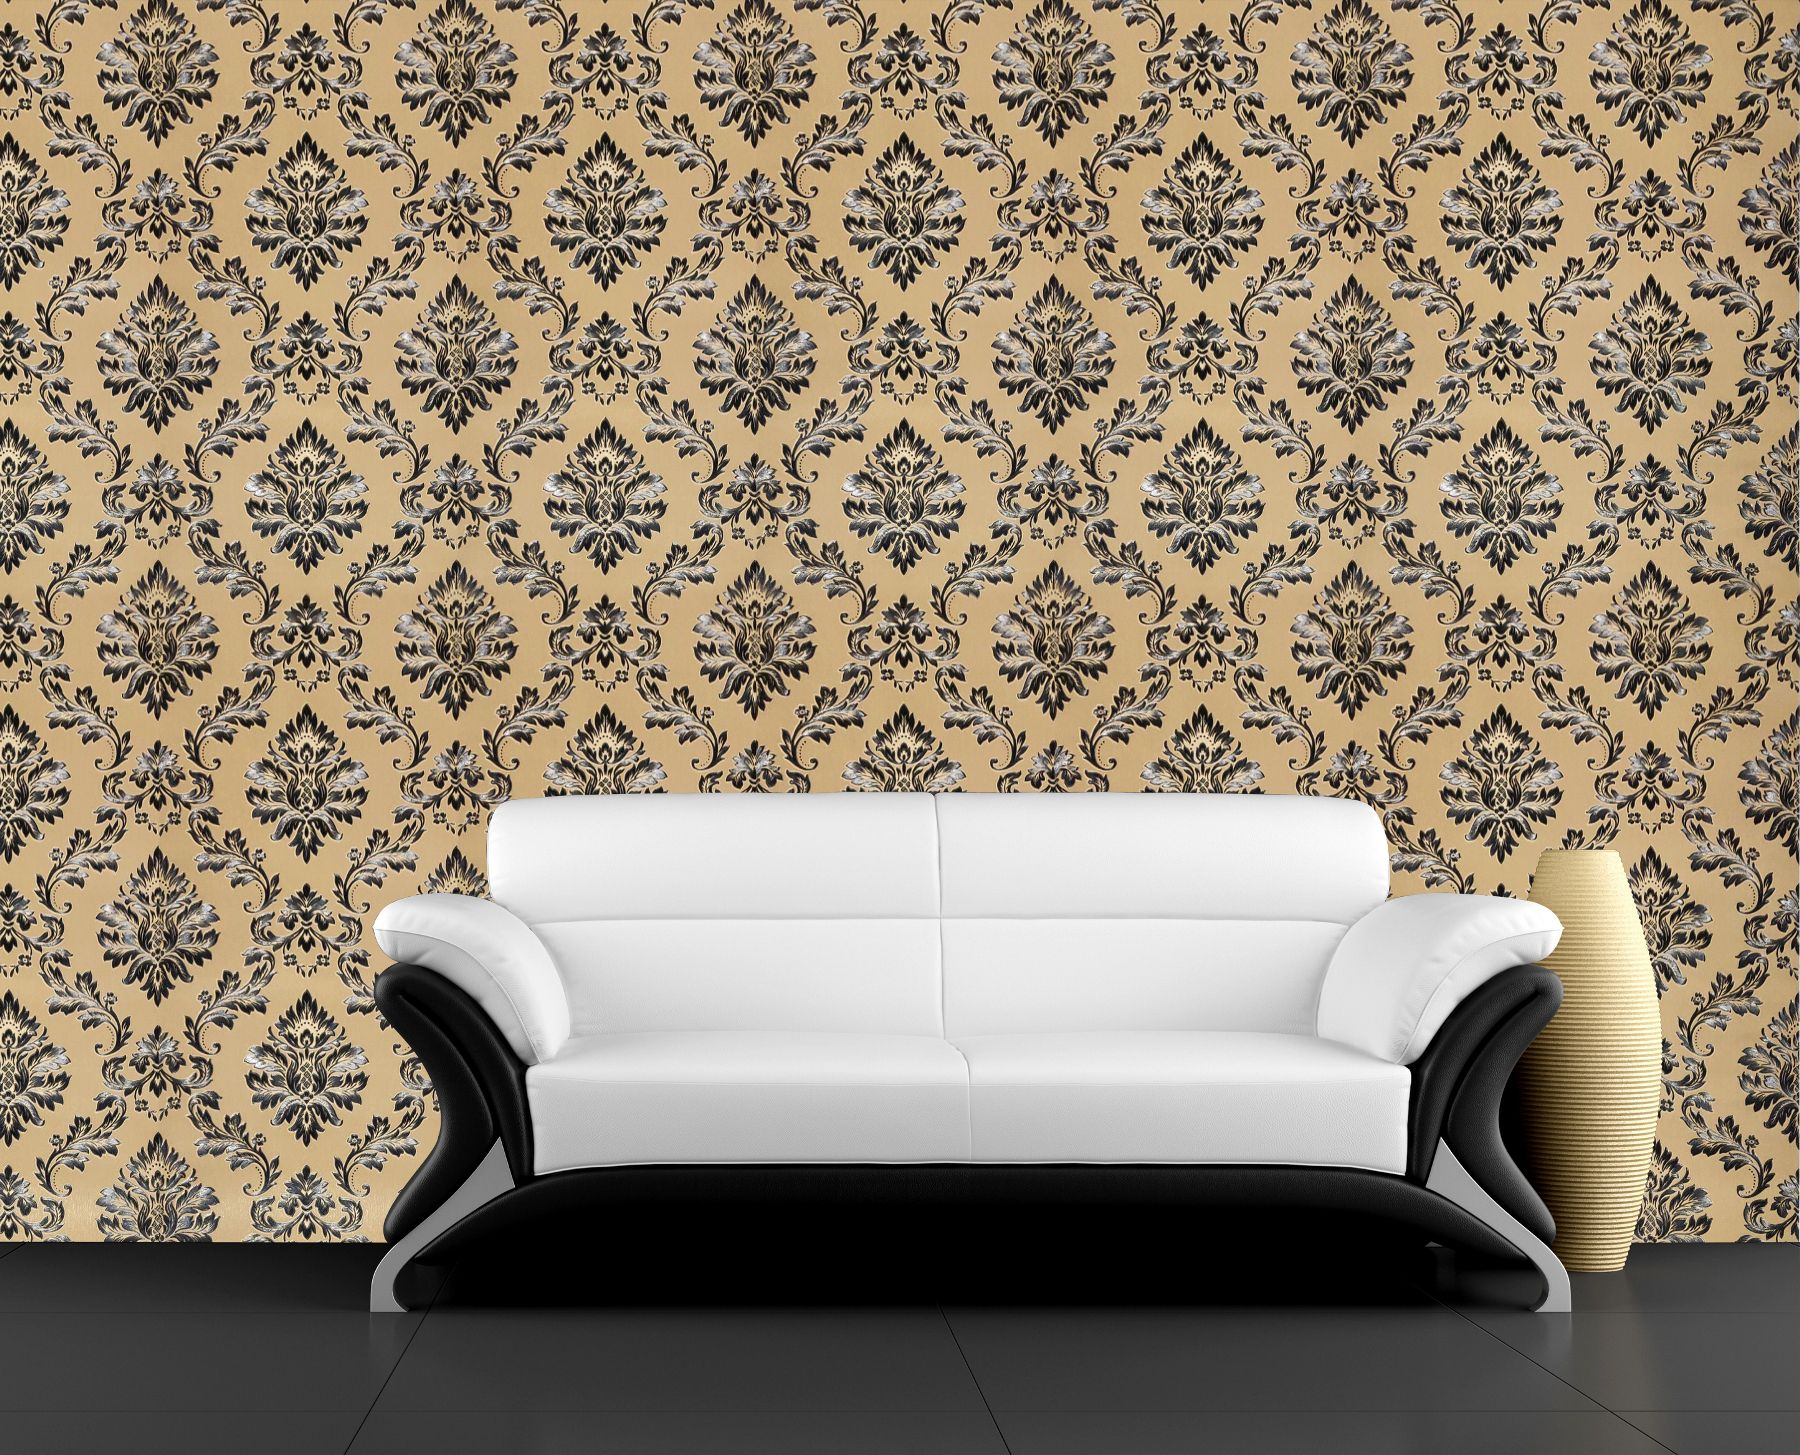 Interior Xpression PVC Designs Wallpapers Golden: Buy Interior Xpression  PVC Designs Wallpapers Golden at Best Price in India on Snapdeal